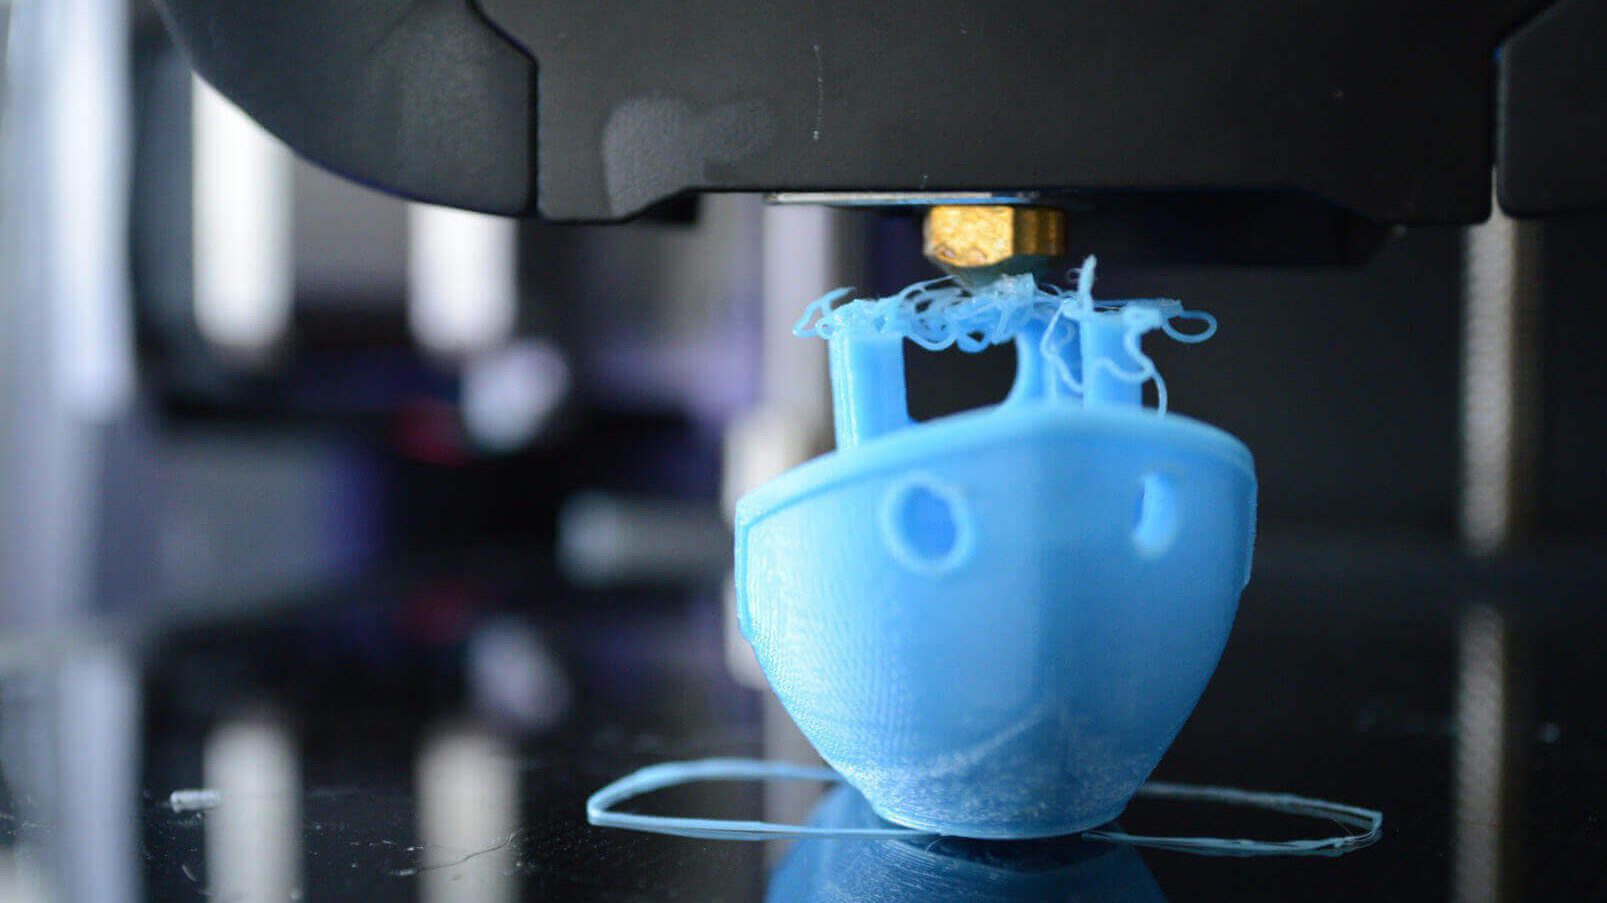 3D Printing Troubleshooting: Does your 3D printer stop in the middle of a print? We have the solution.